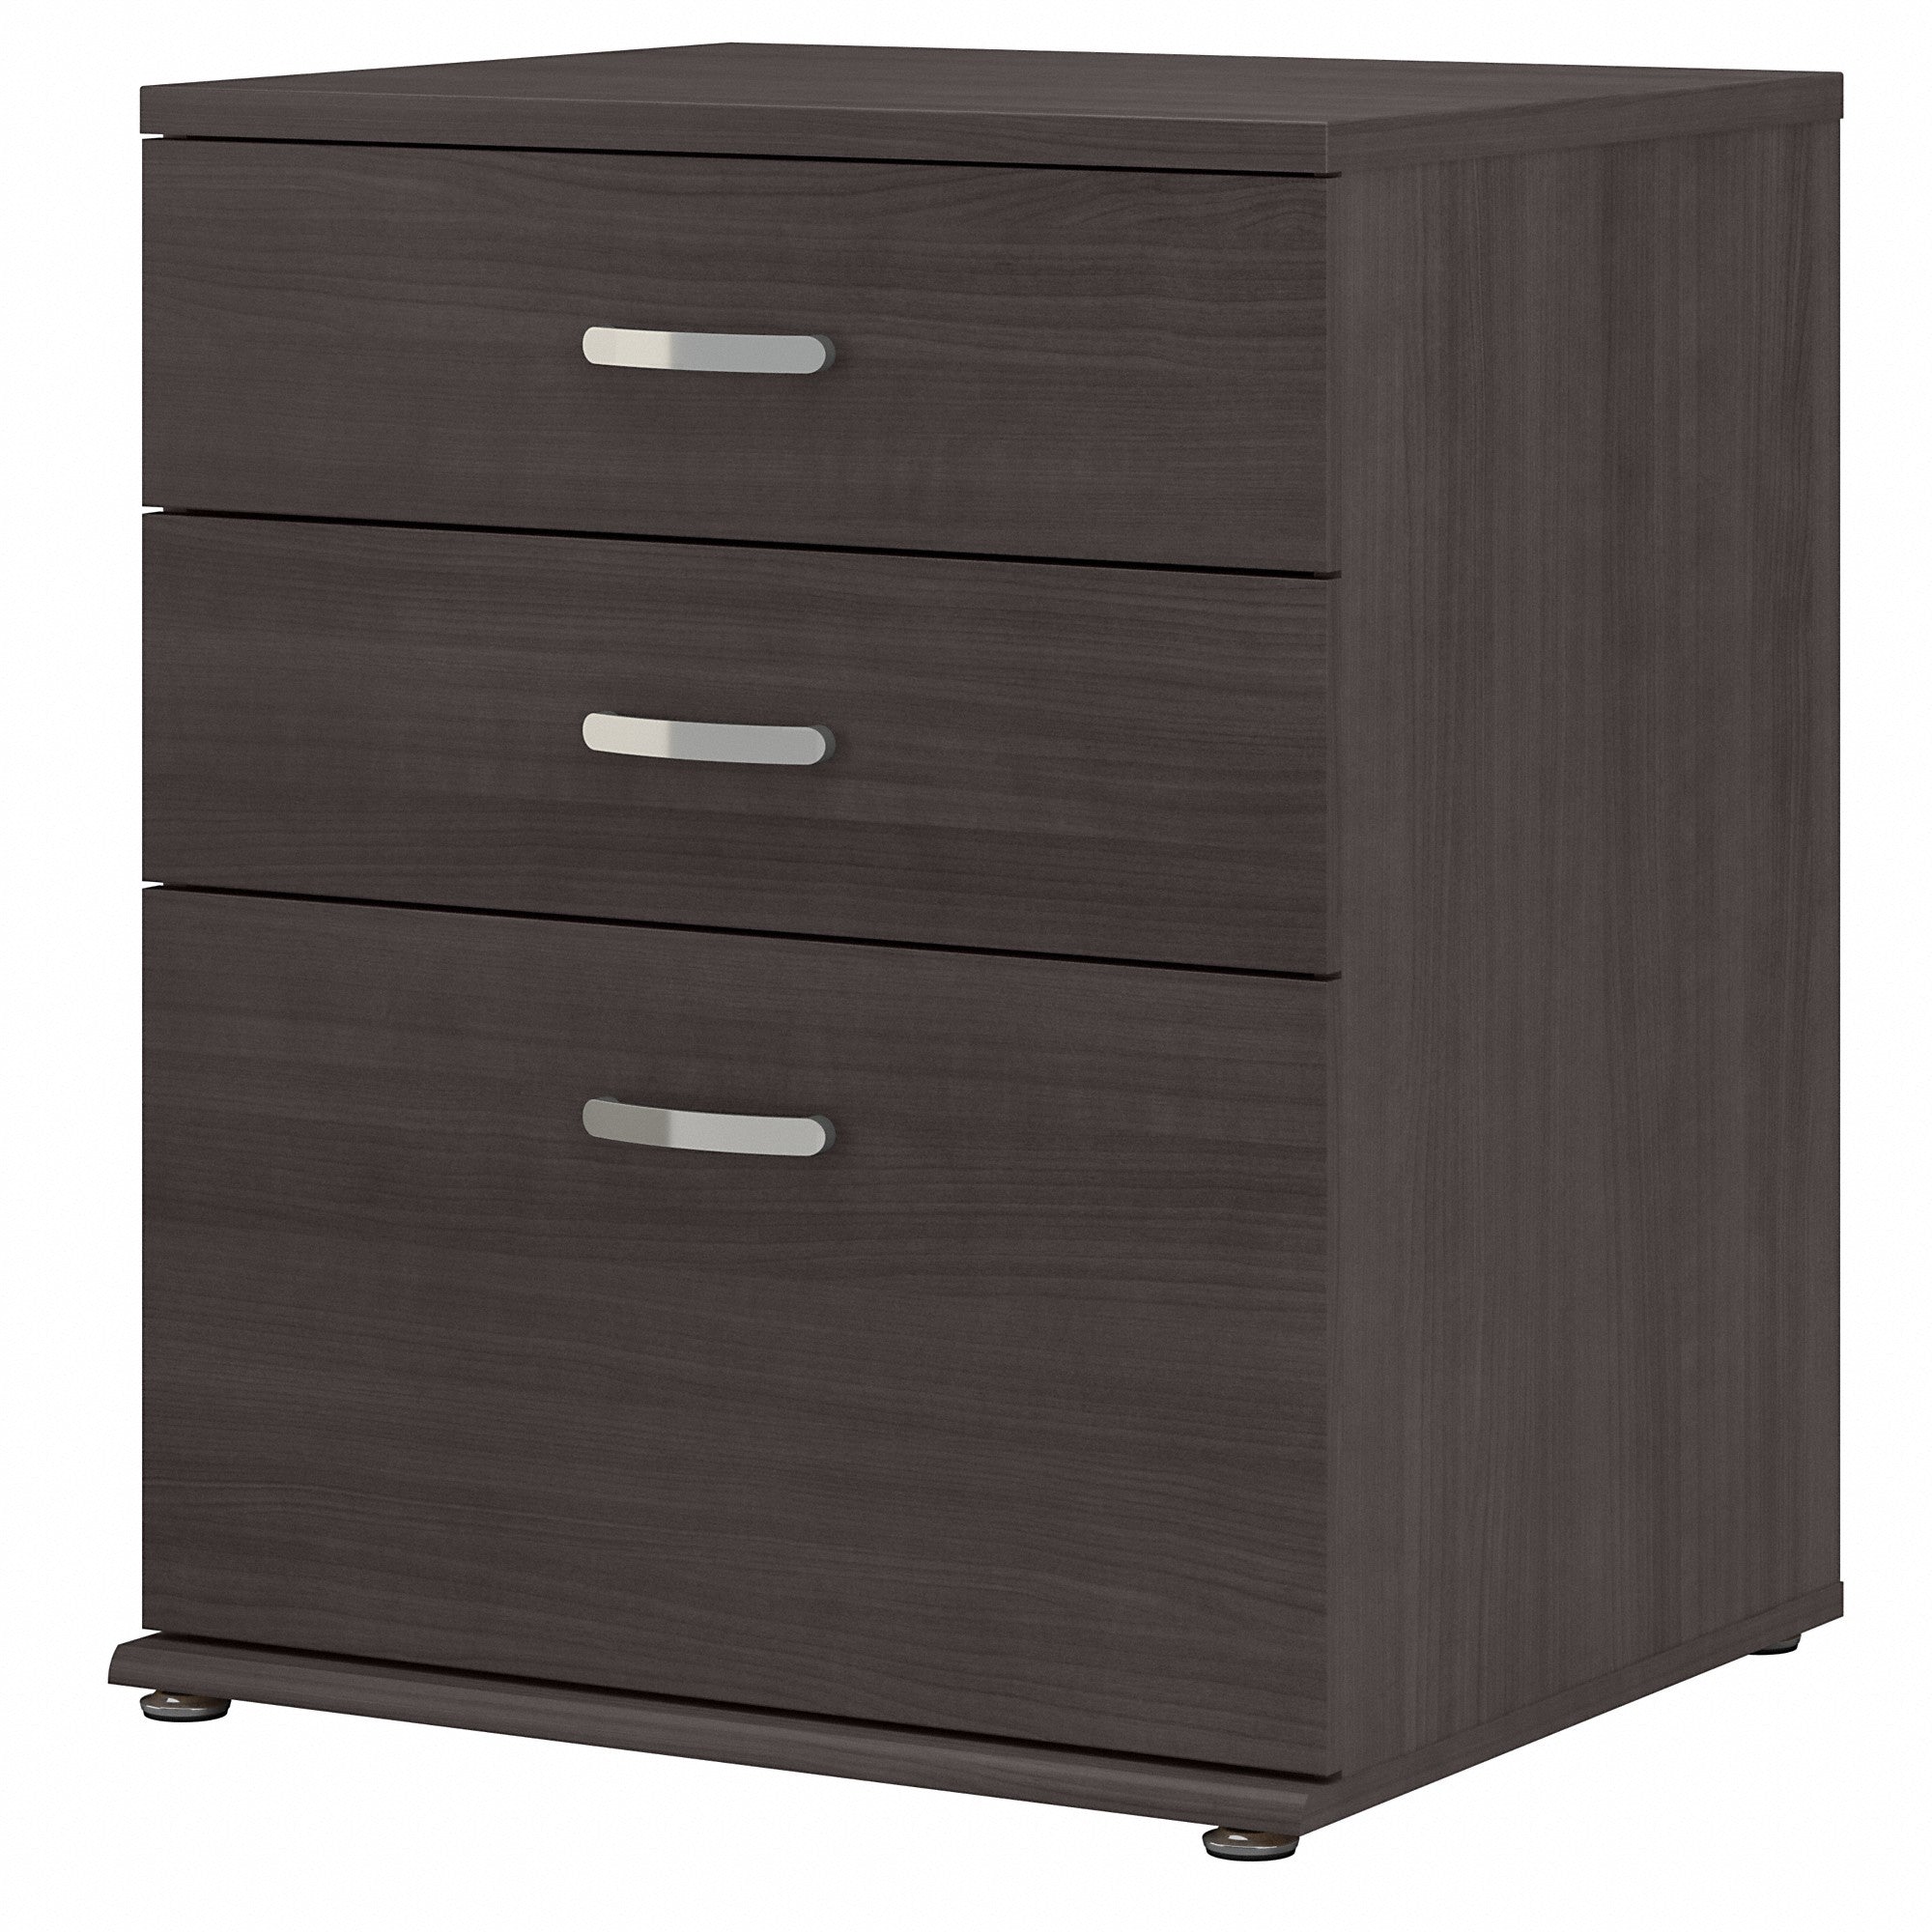 Bush Business Furniture Universal Floor Storage Cabinet with Drawers | Storm Gray/Storm Gray